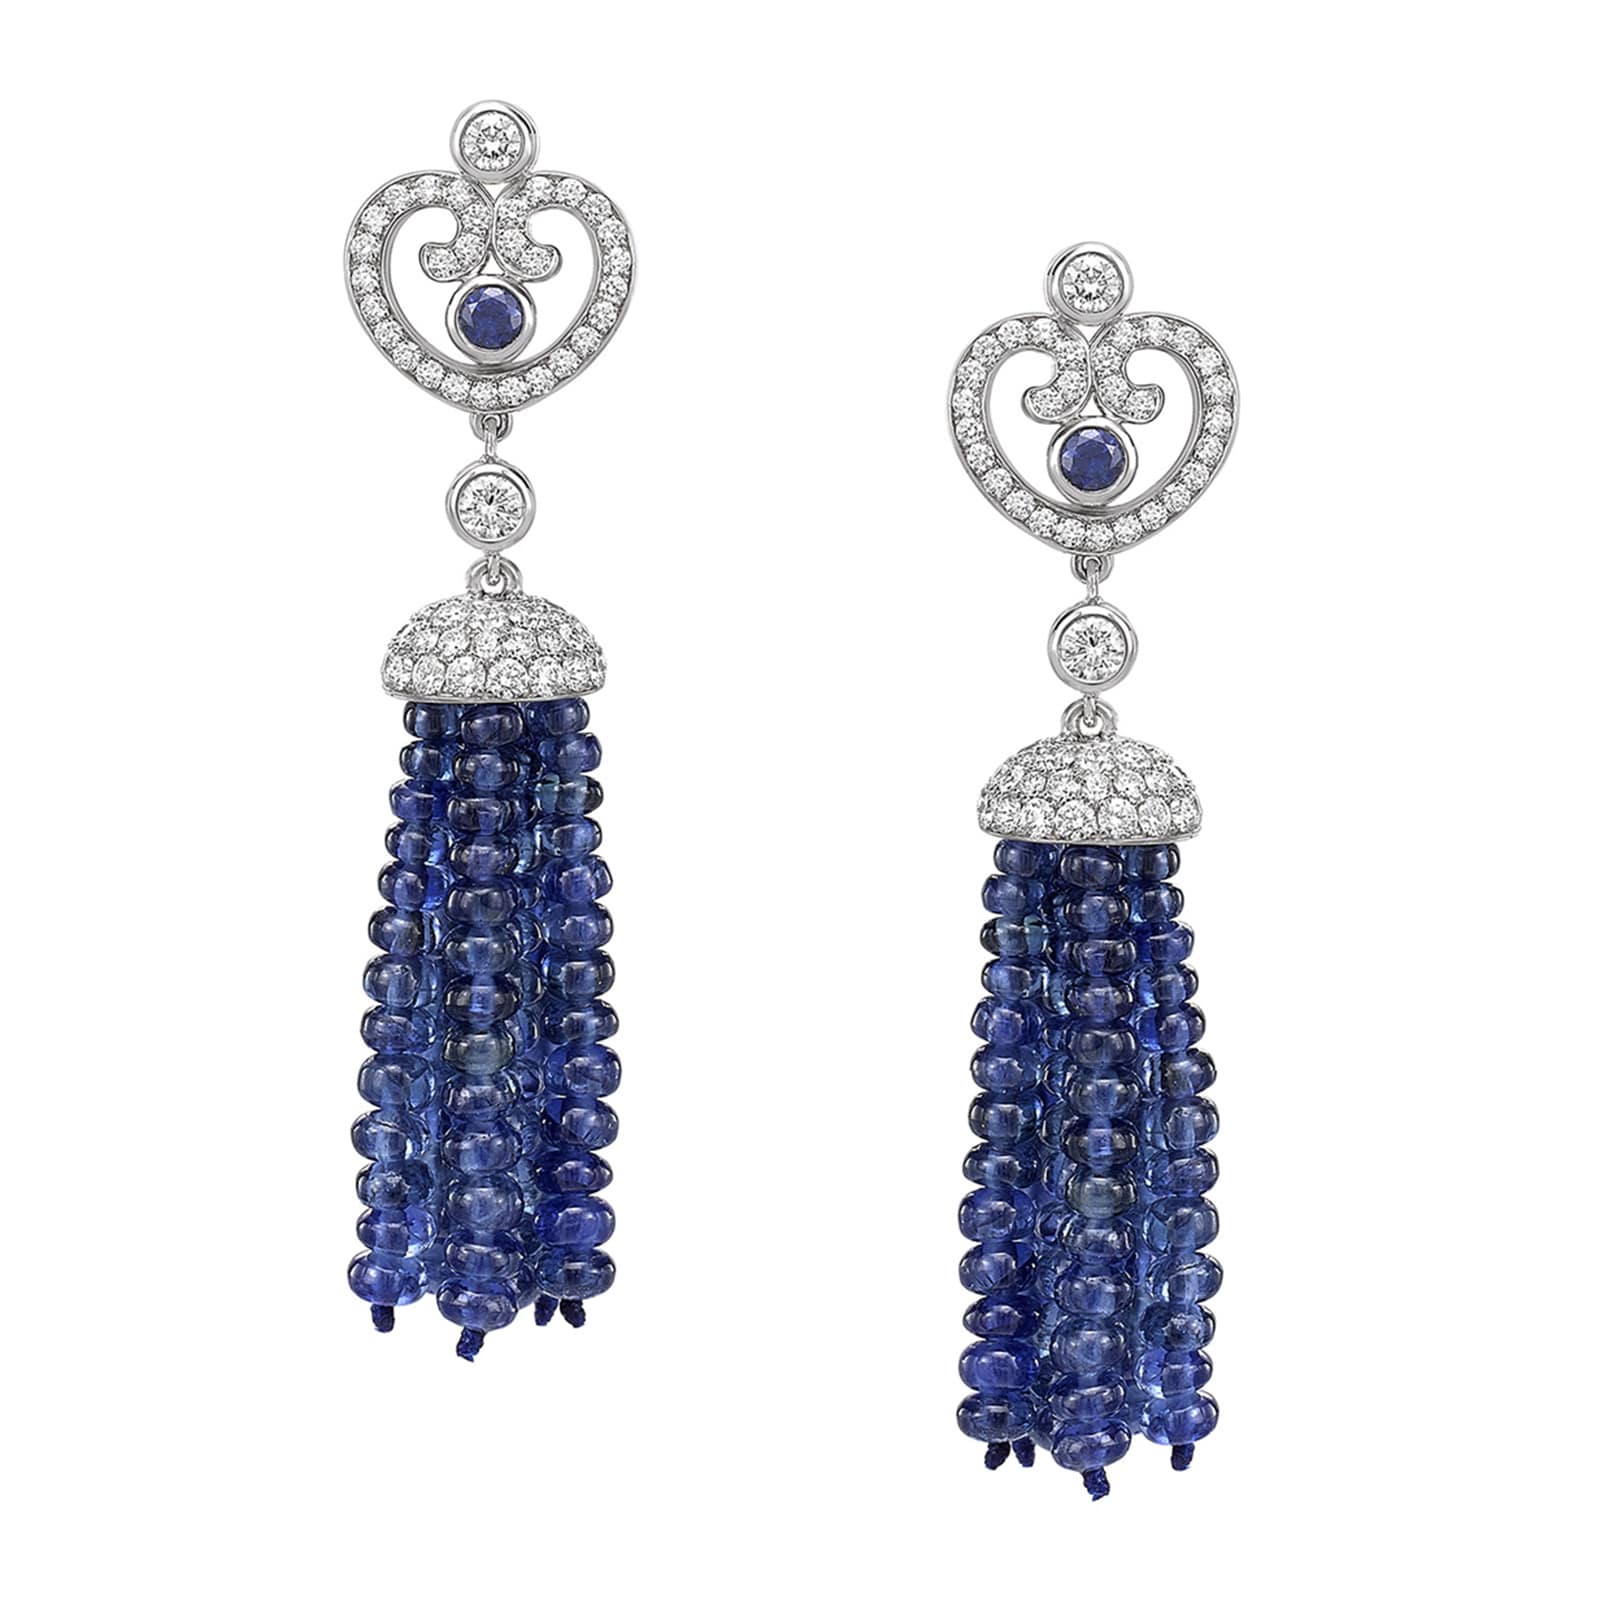 Faberge Imperial Imperatrice 18ct White Gold & Blue Sapphire Tassel Earrings